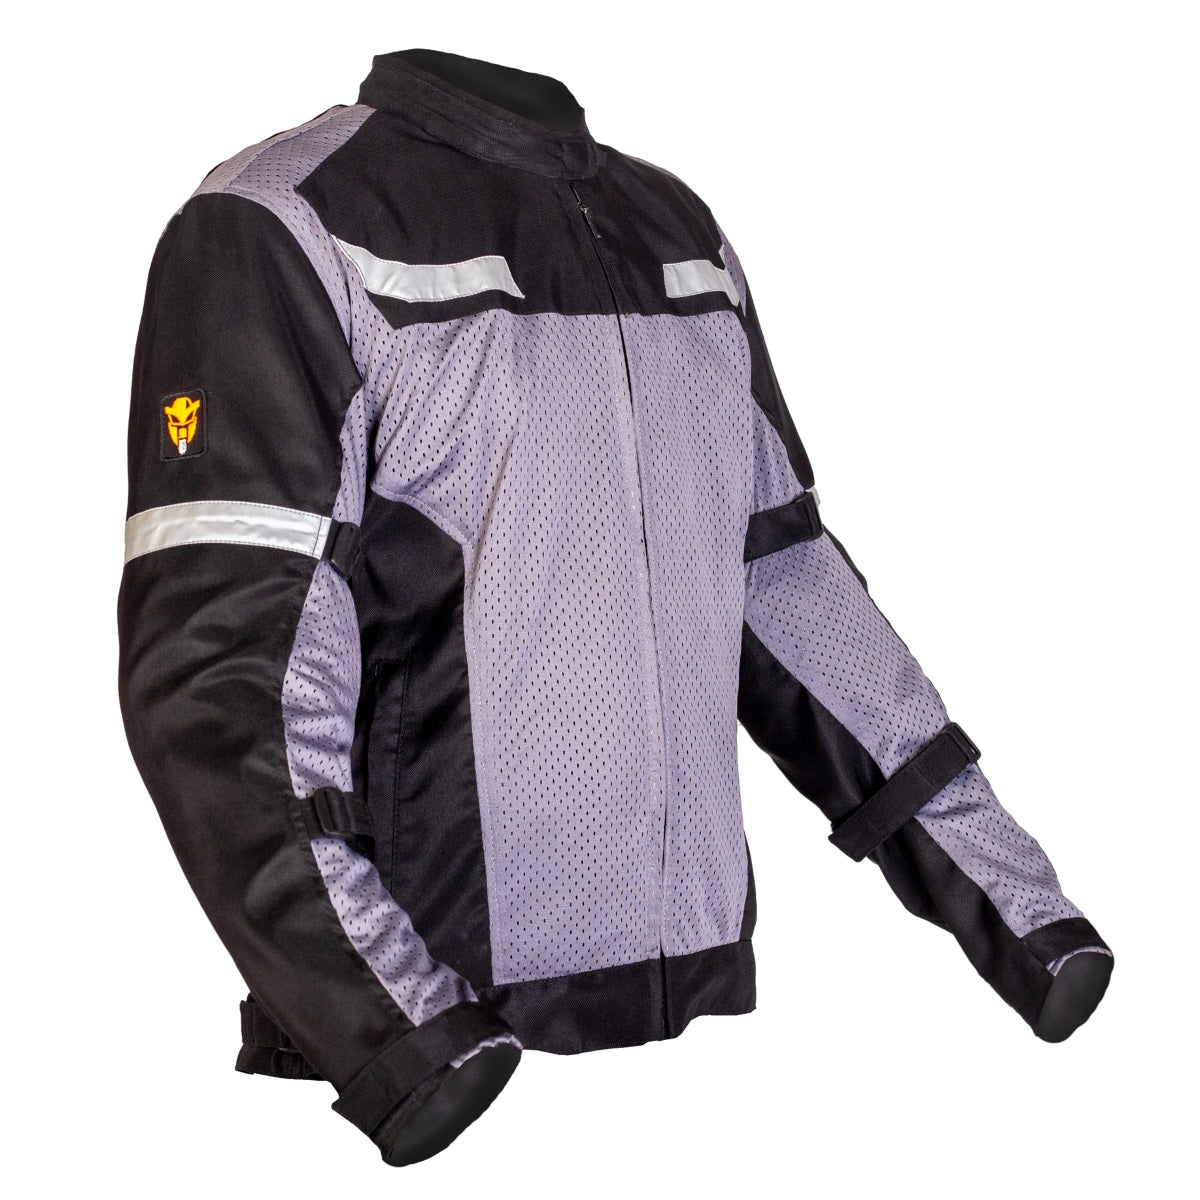 Introducing Merlin Motorcycle Clothing